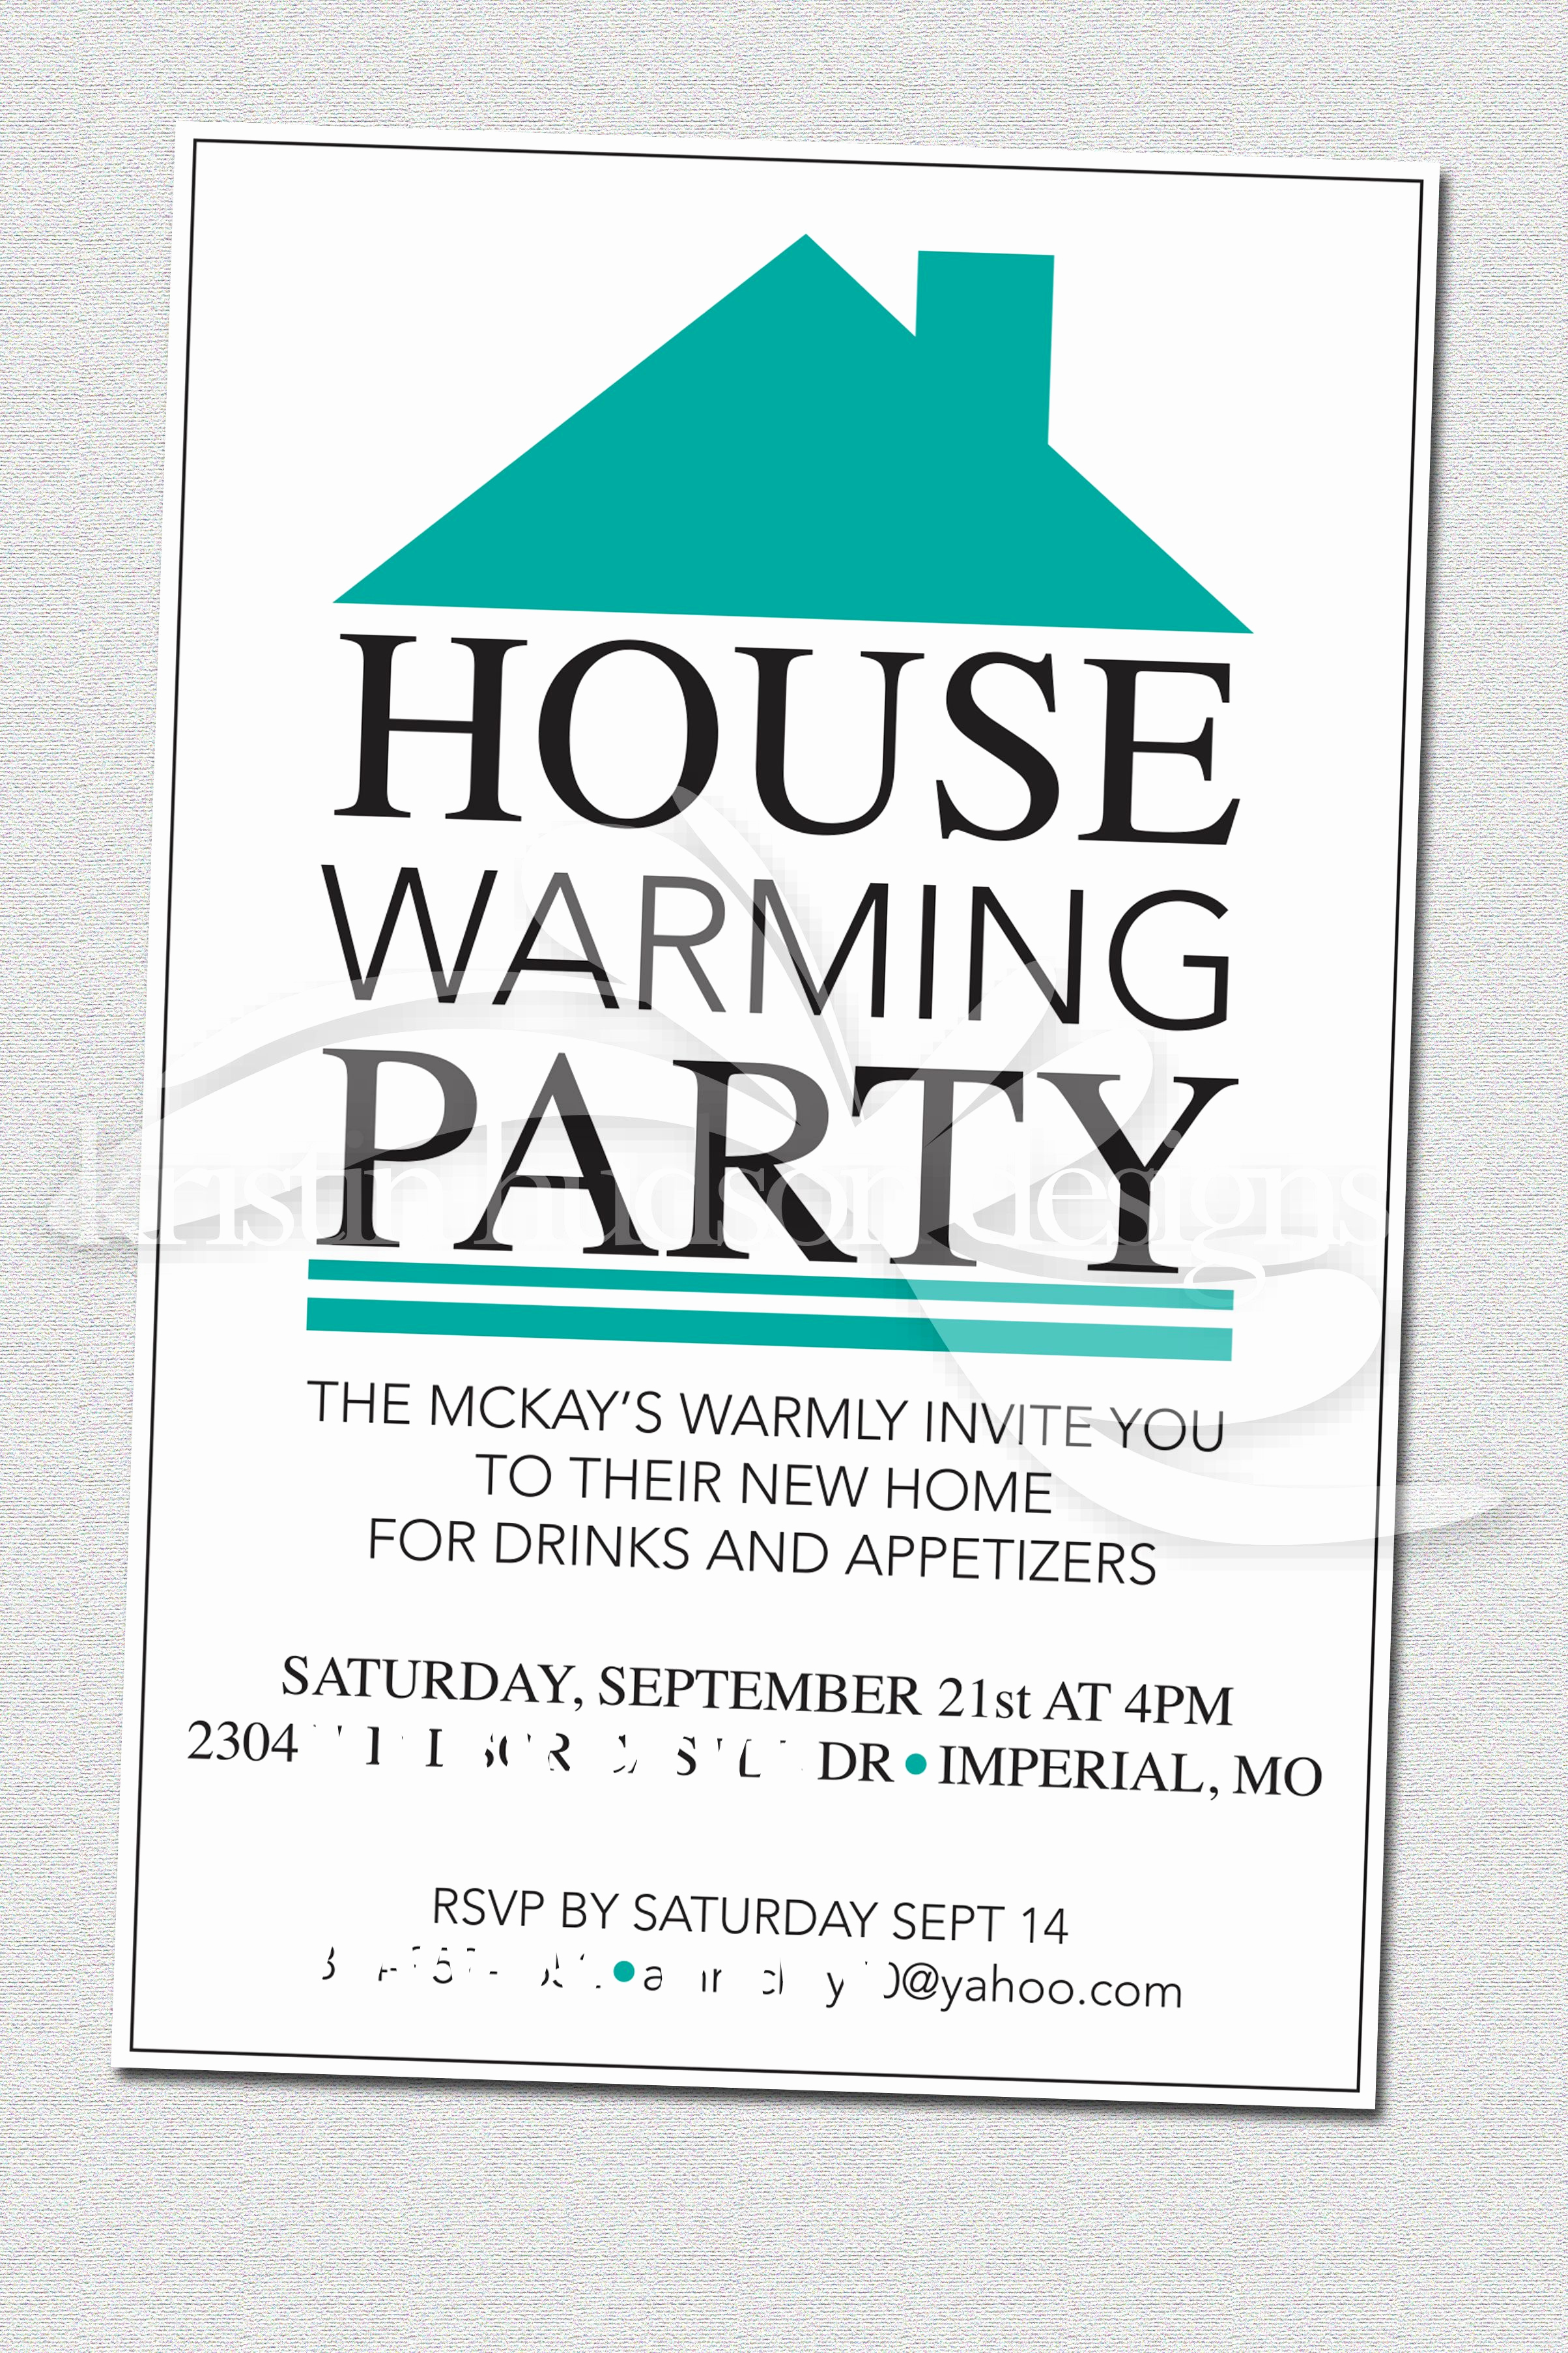 House Warming Invitation Message Fresh House Warming Party Invite